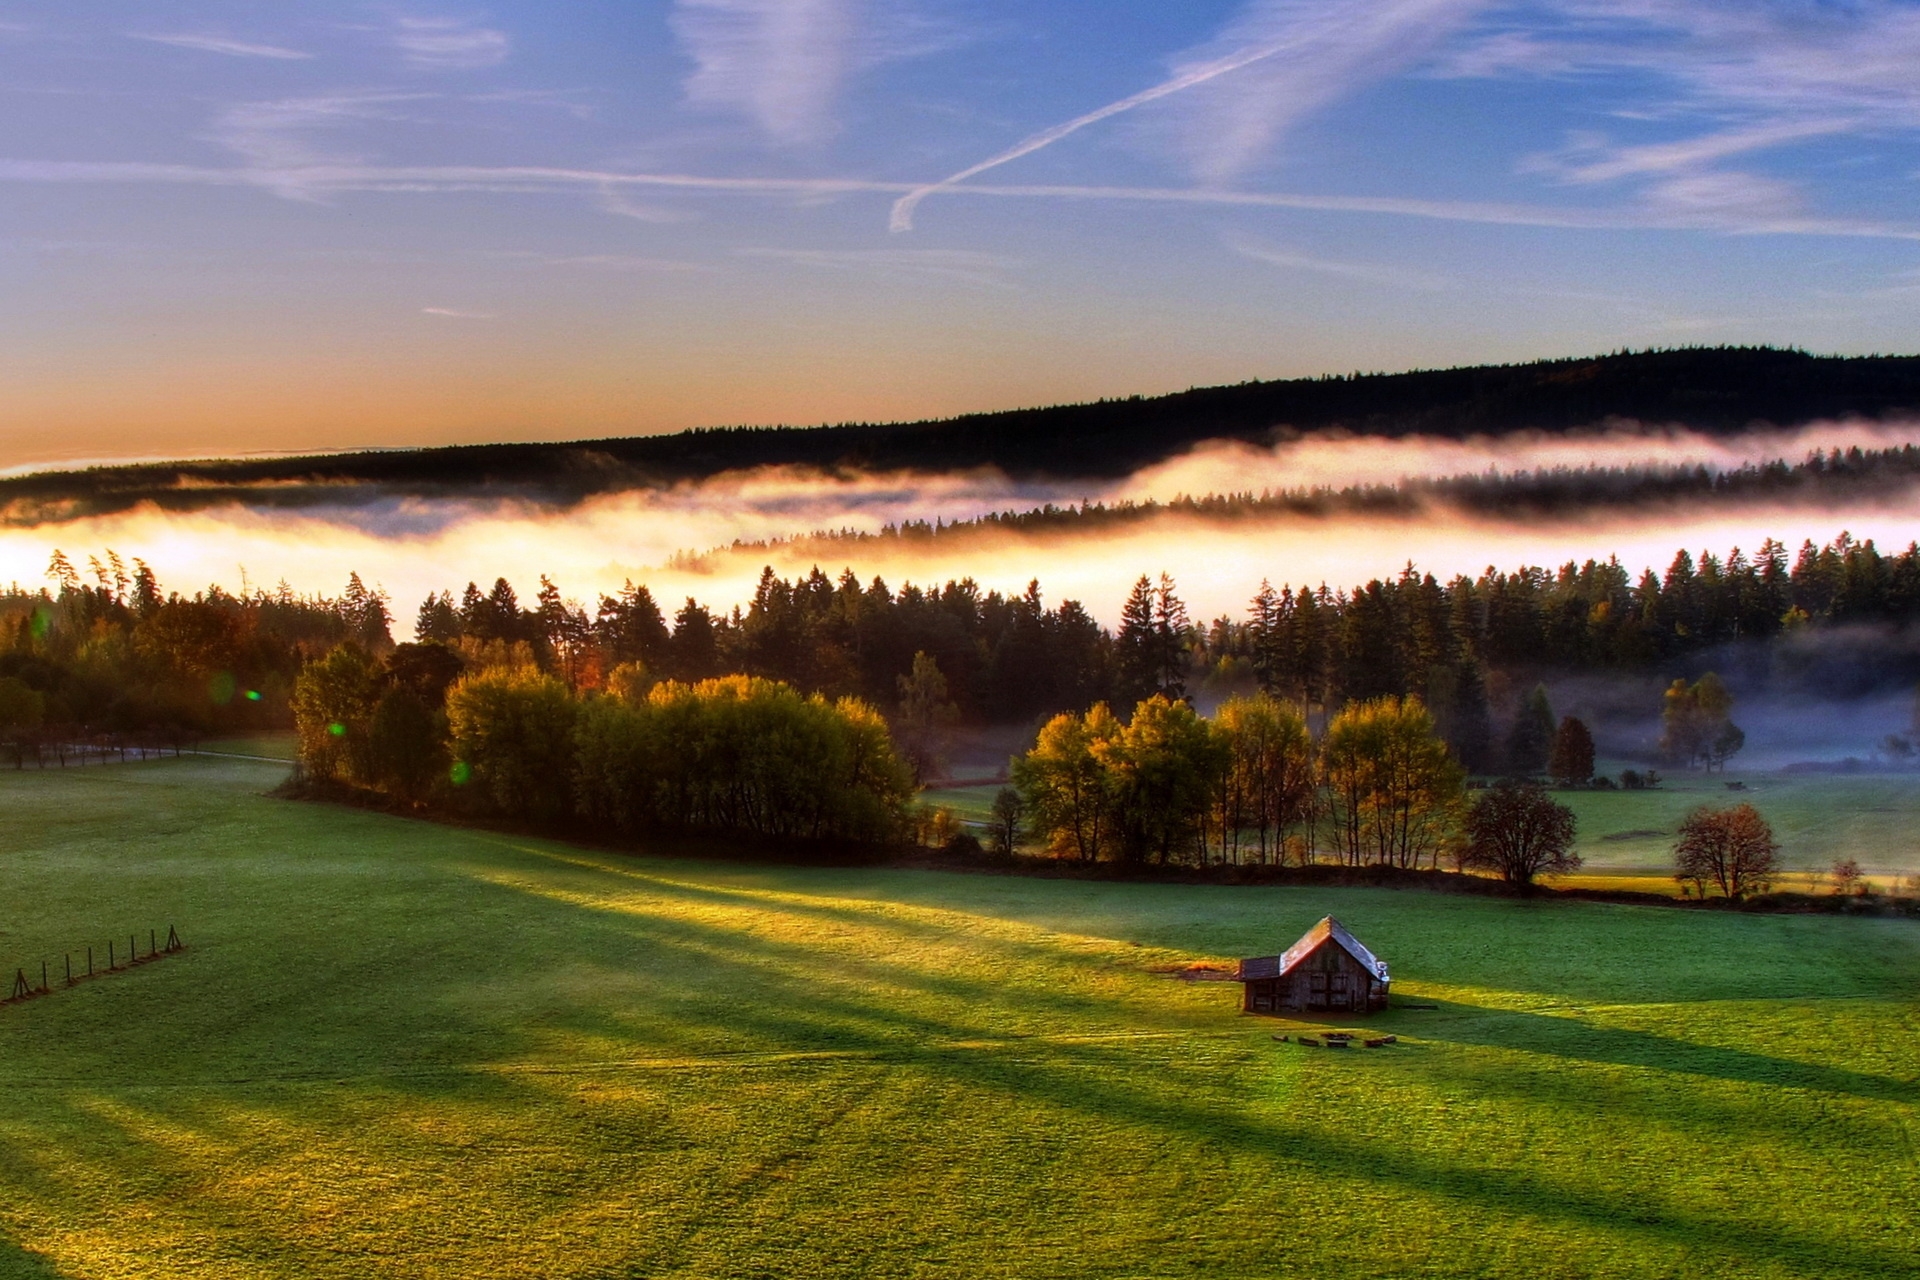 green, lines, nature, sky, forest, fog, field, small house, lodge, height, view, dahl, distance, alone, lonely, open spaces, expanse